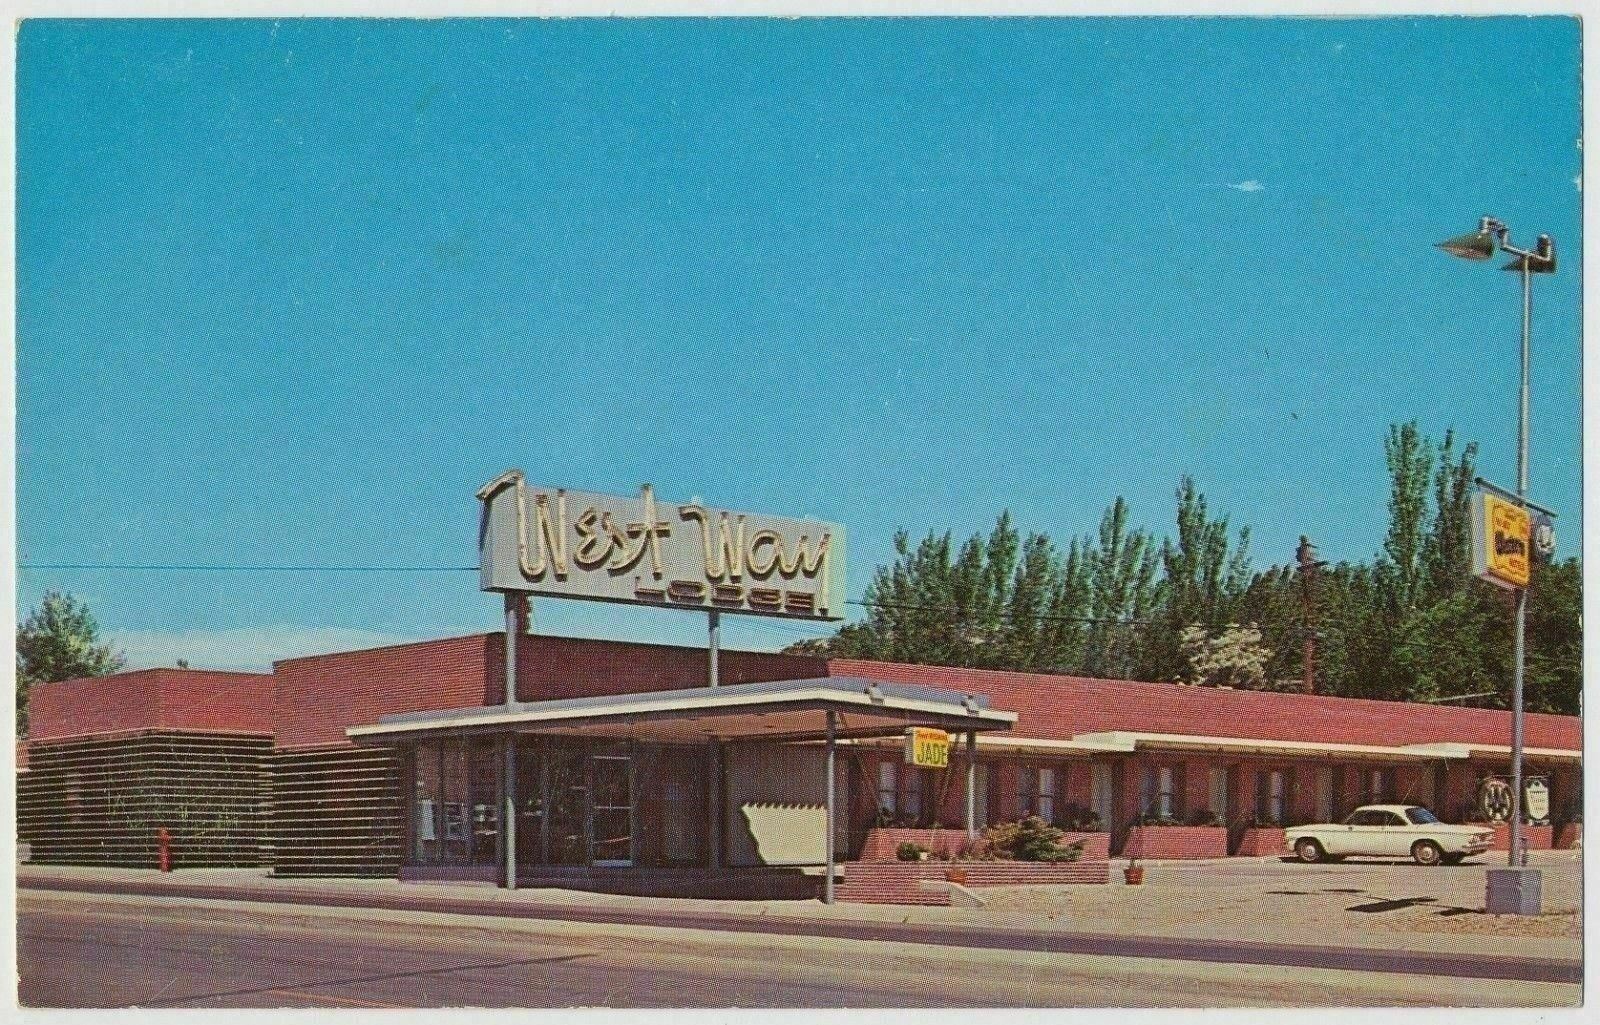 West Way Lodge, Lincoln Highway 30, Rawlins, Wyoming